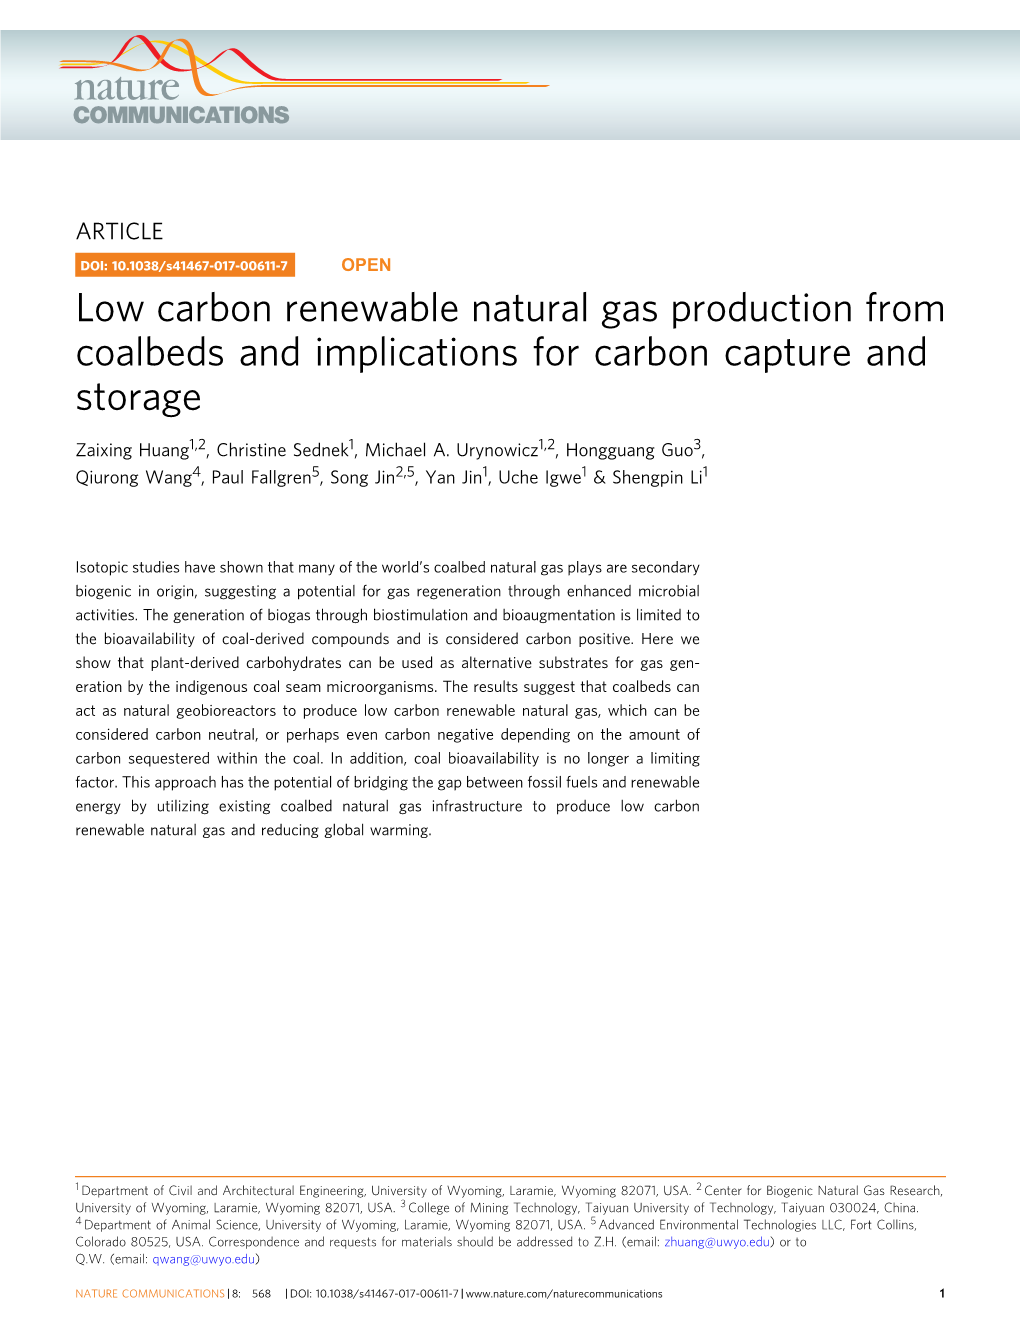 Low Carbon Renewable Natural Gas Production from Coalbeds and Implications for Carbon Capture and Storage